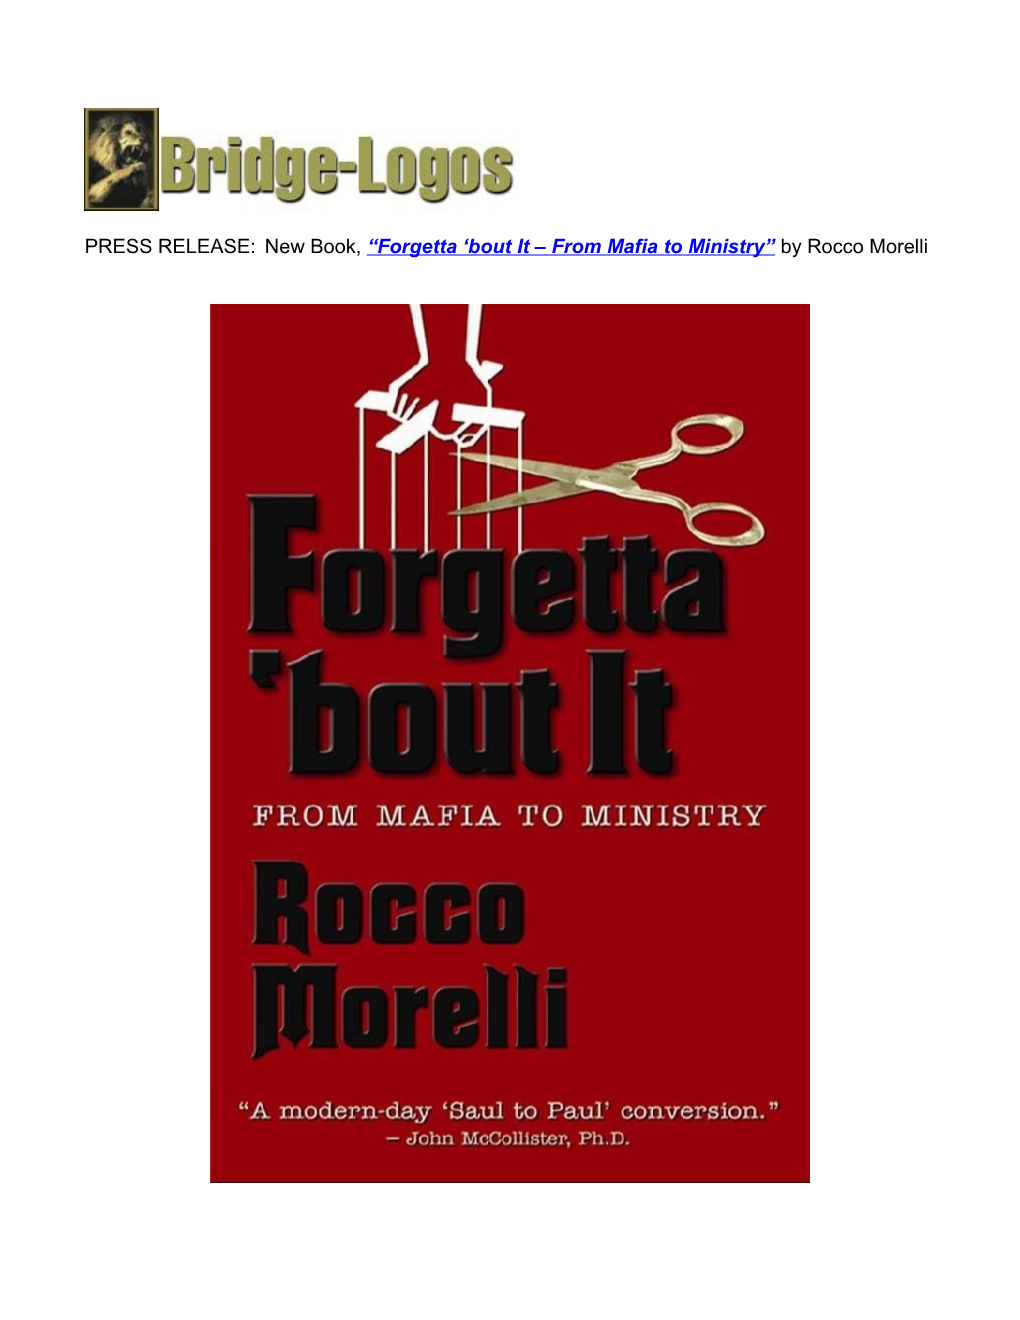 PRESS RELEASE:New Book, Forgetta Bout It from Mafia to Ministry by Rocco Morelli